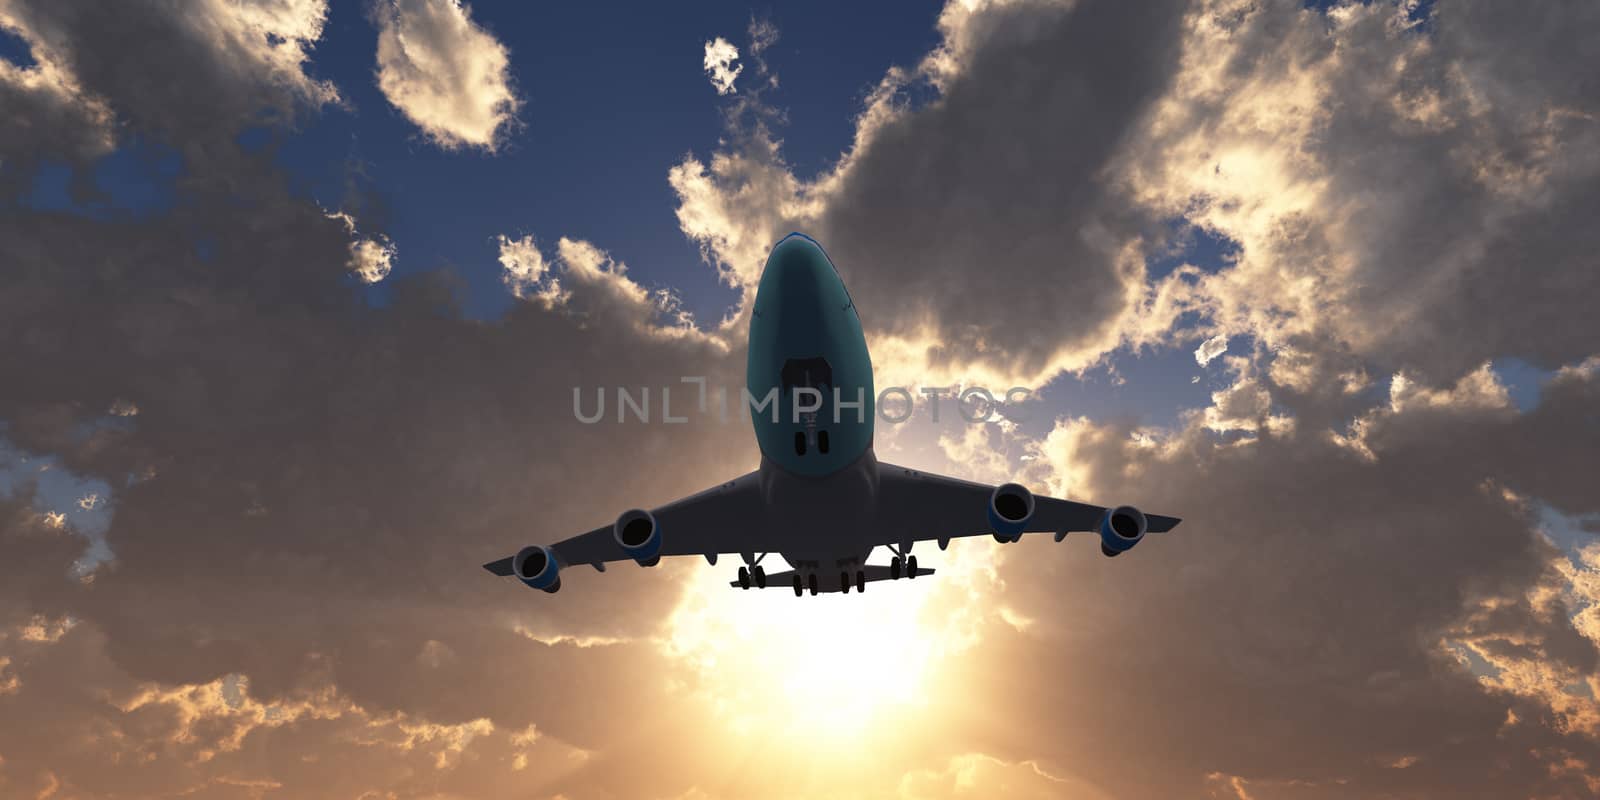 airplane in sunset gold sky, 3d rendering